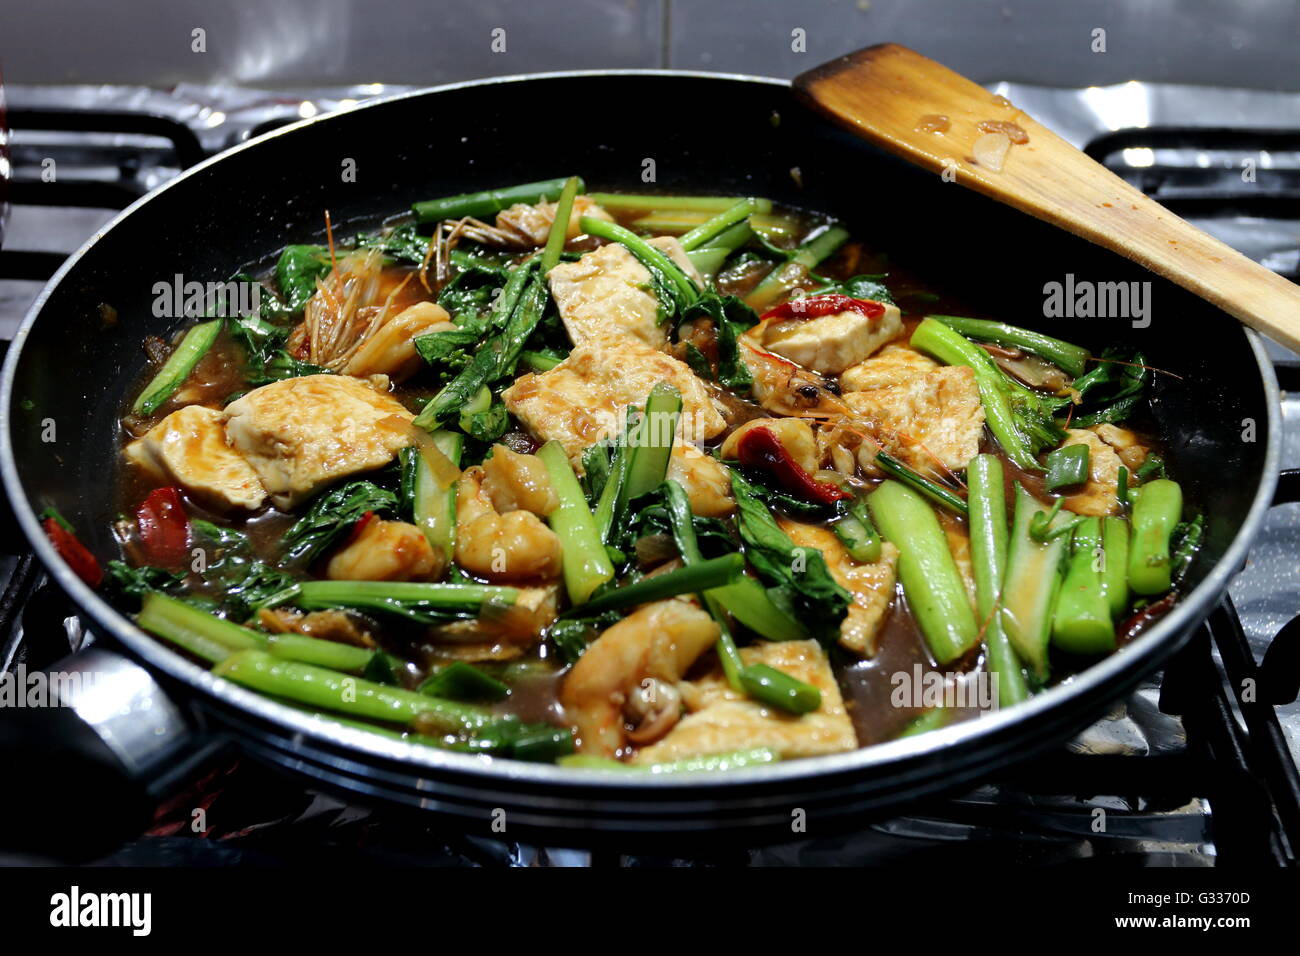 Stir fry tofu with prawns and choy sum - home cooked Asian food Stock Photo